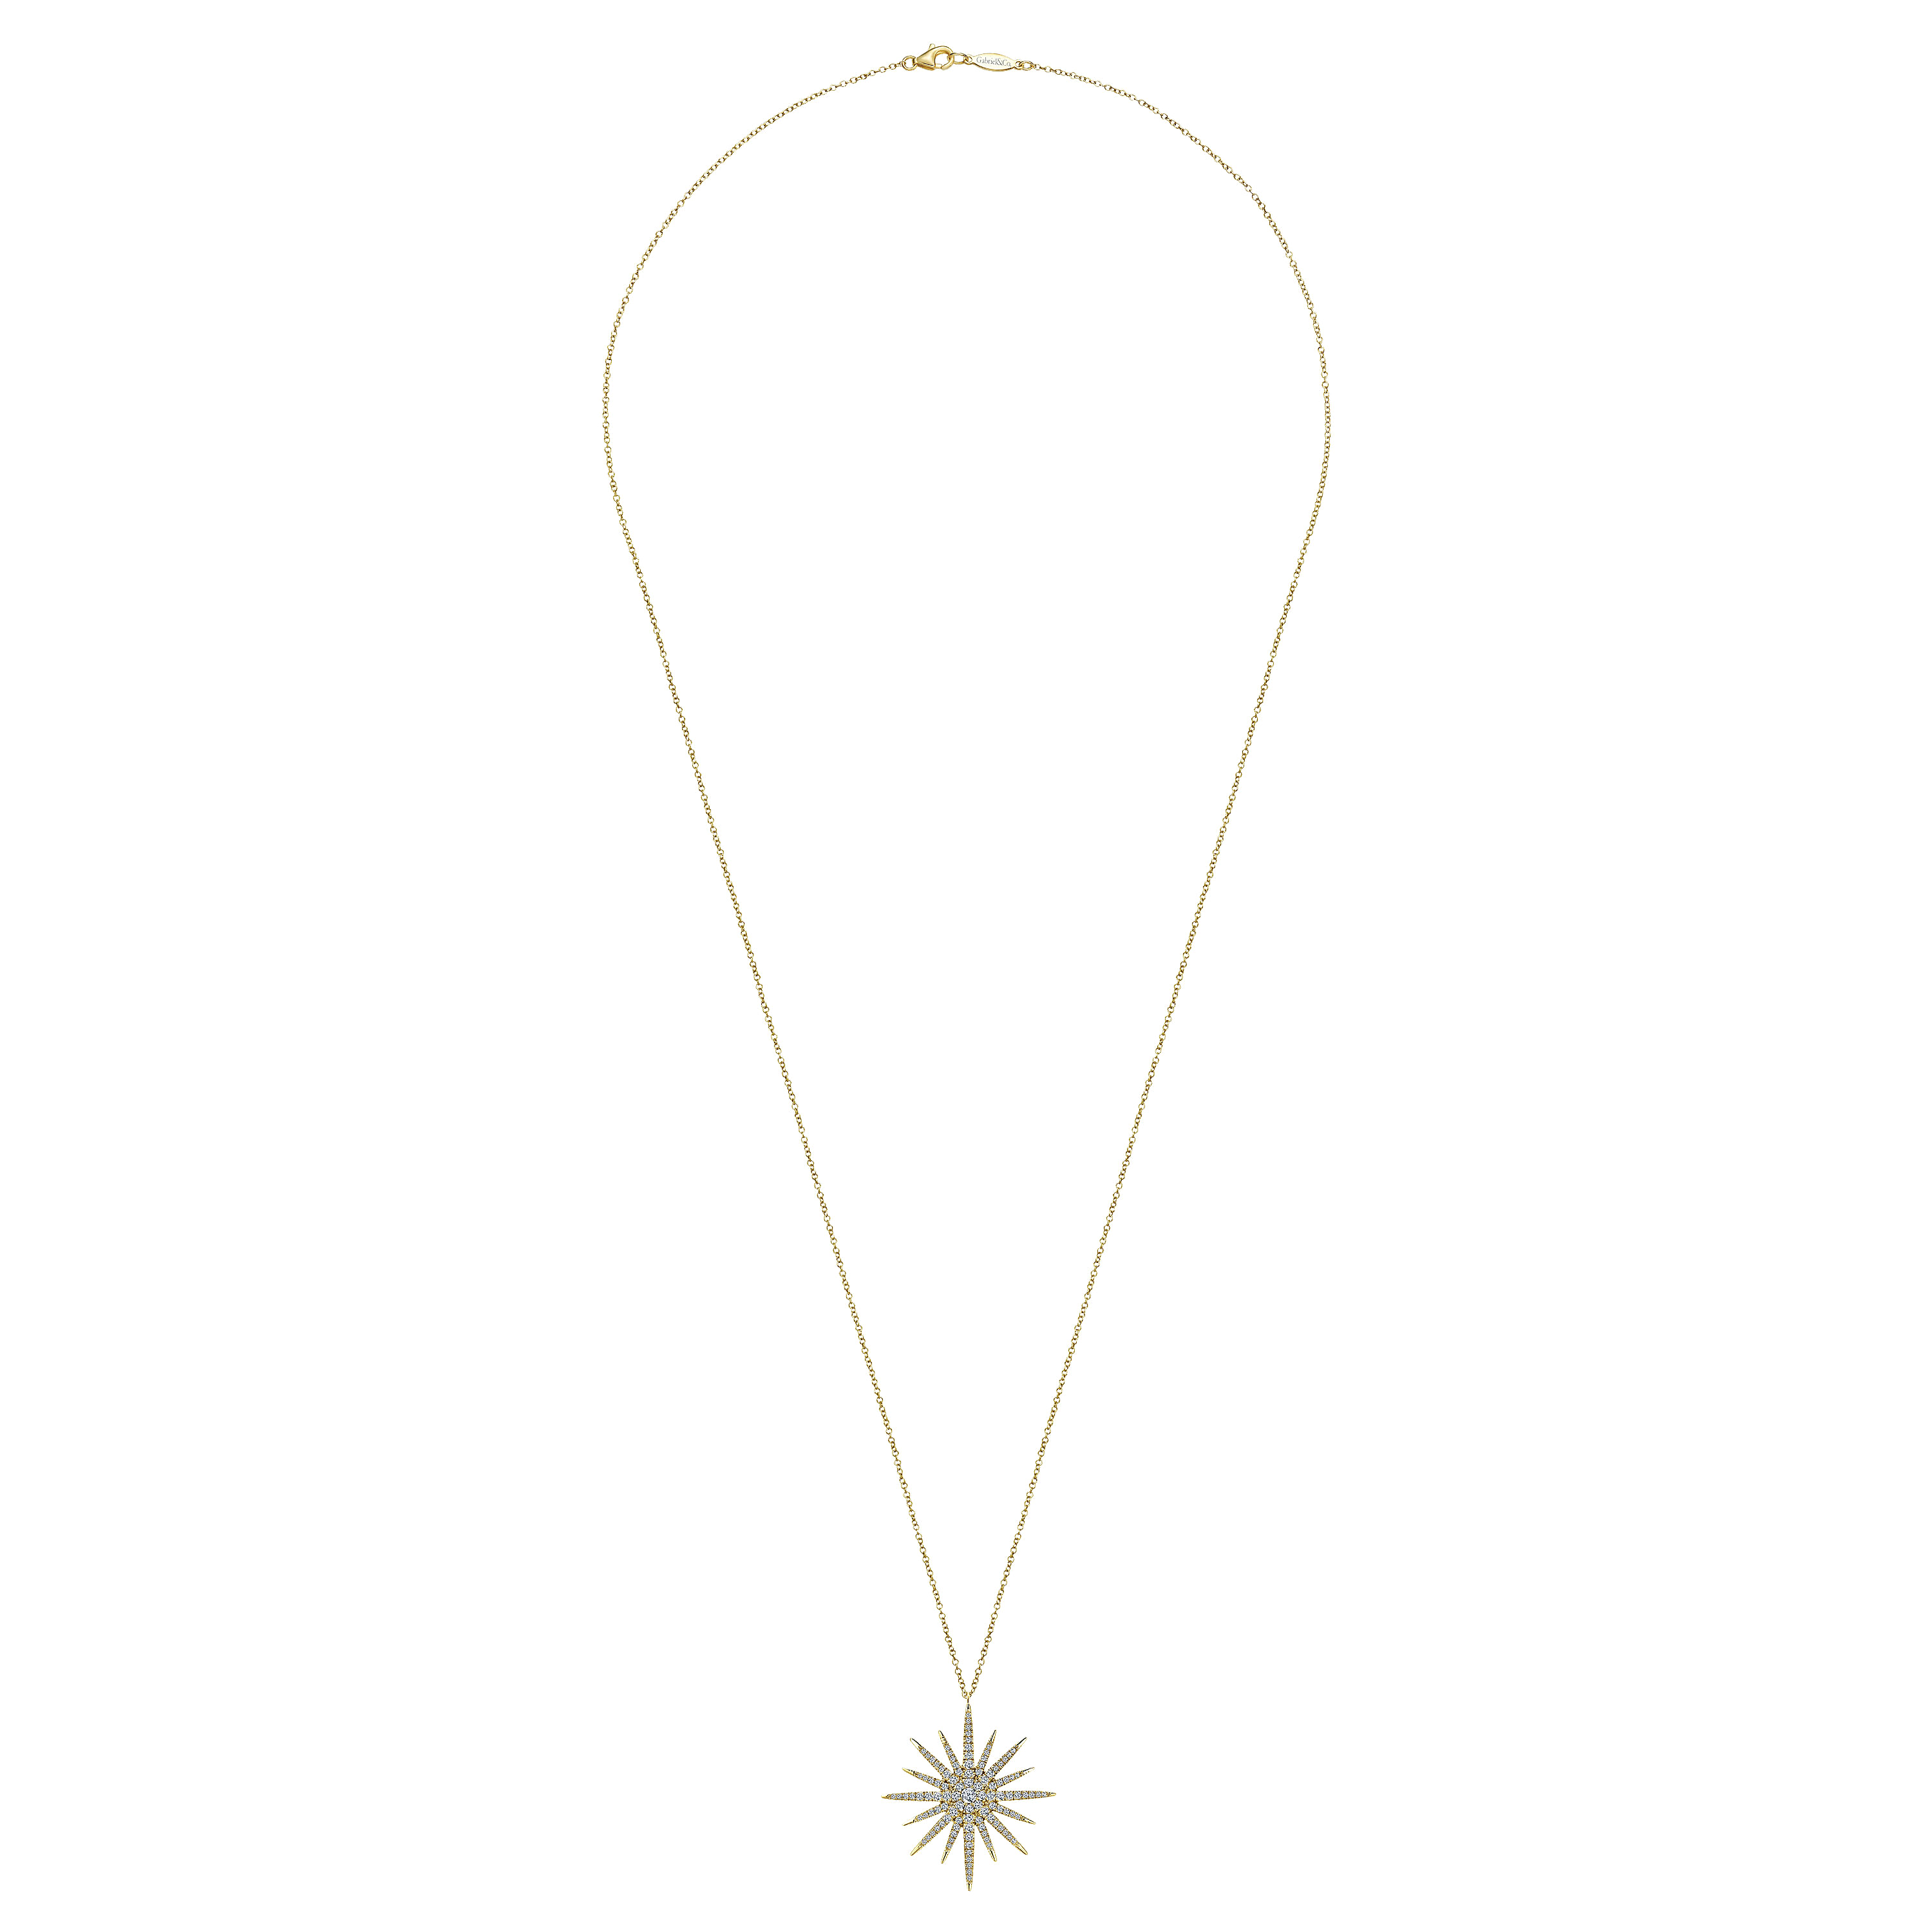 25 Inch 14K Yellow Gold Starburst Pendant Necklace